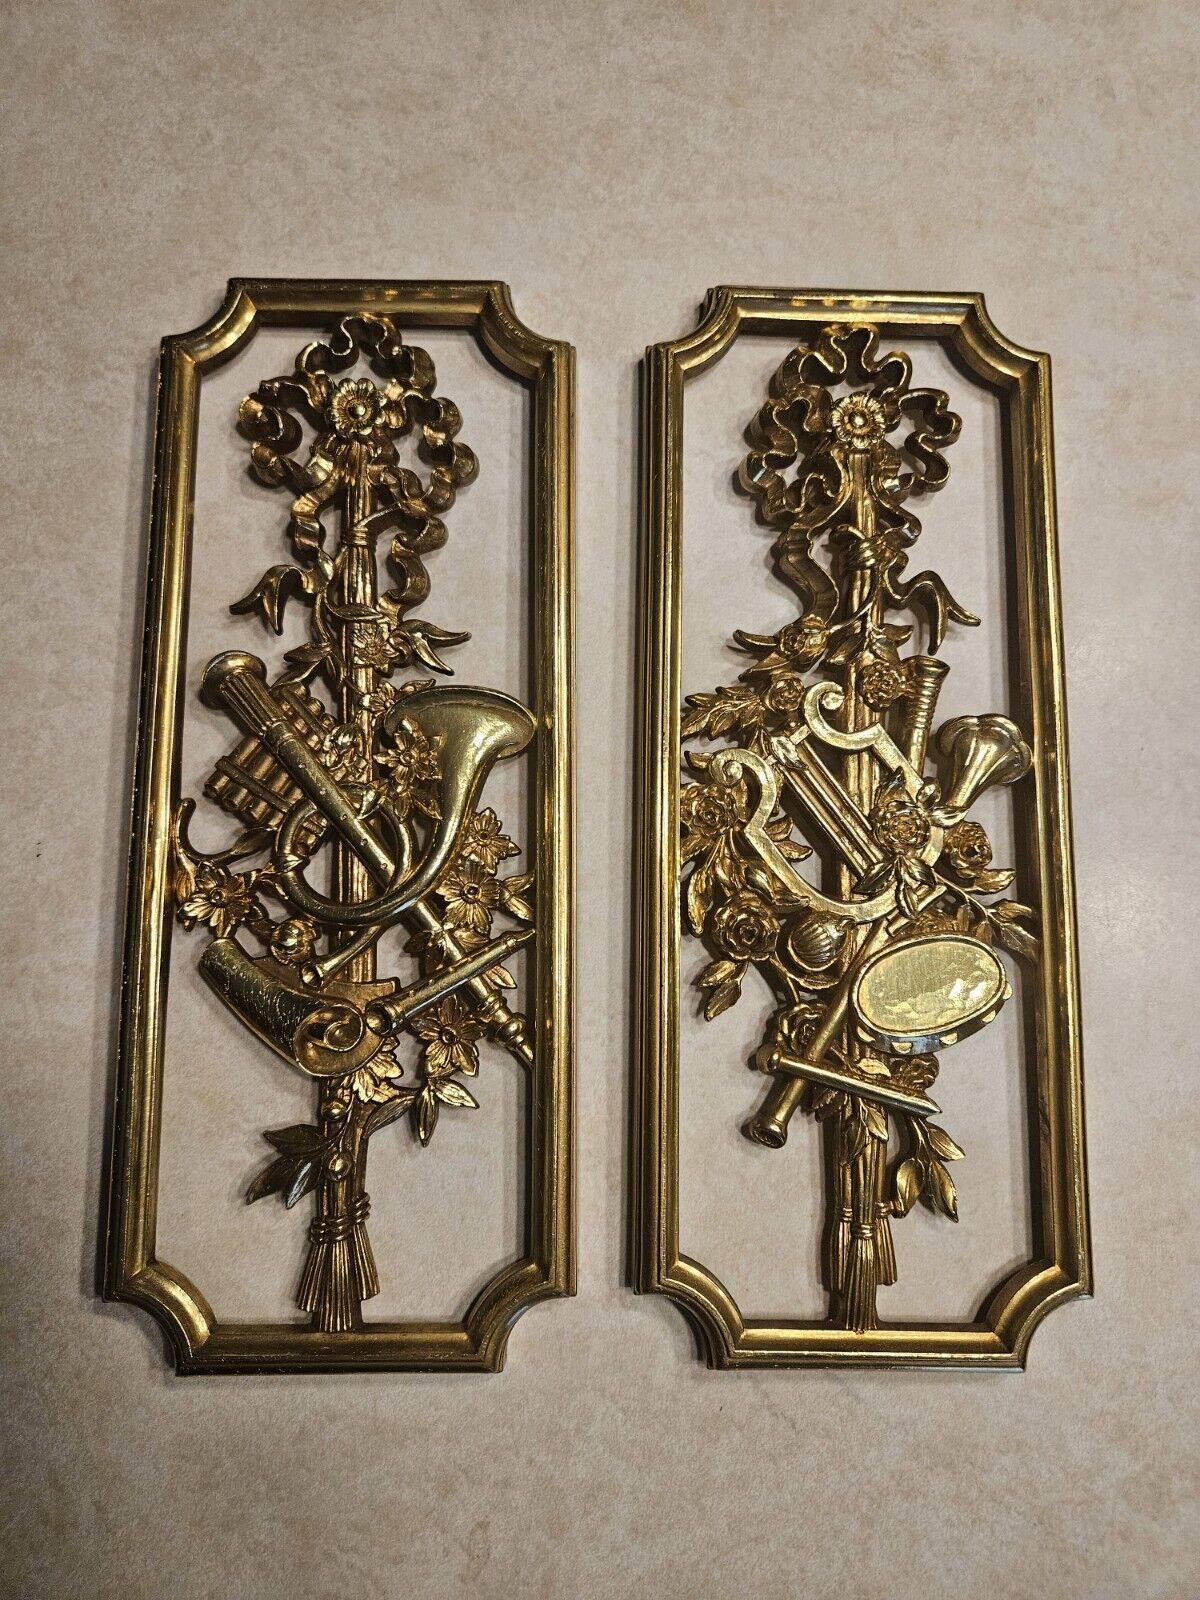 Hollywood Regency Pair MUSIC SYROCO WALL ART PLAQUES VINTAGE GOLD HOMCO 1964 MCM